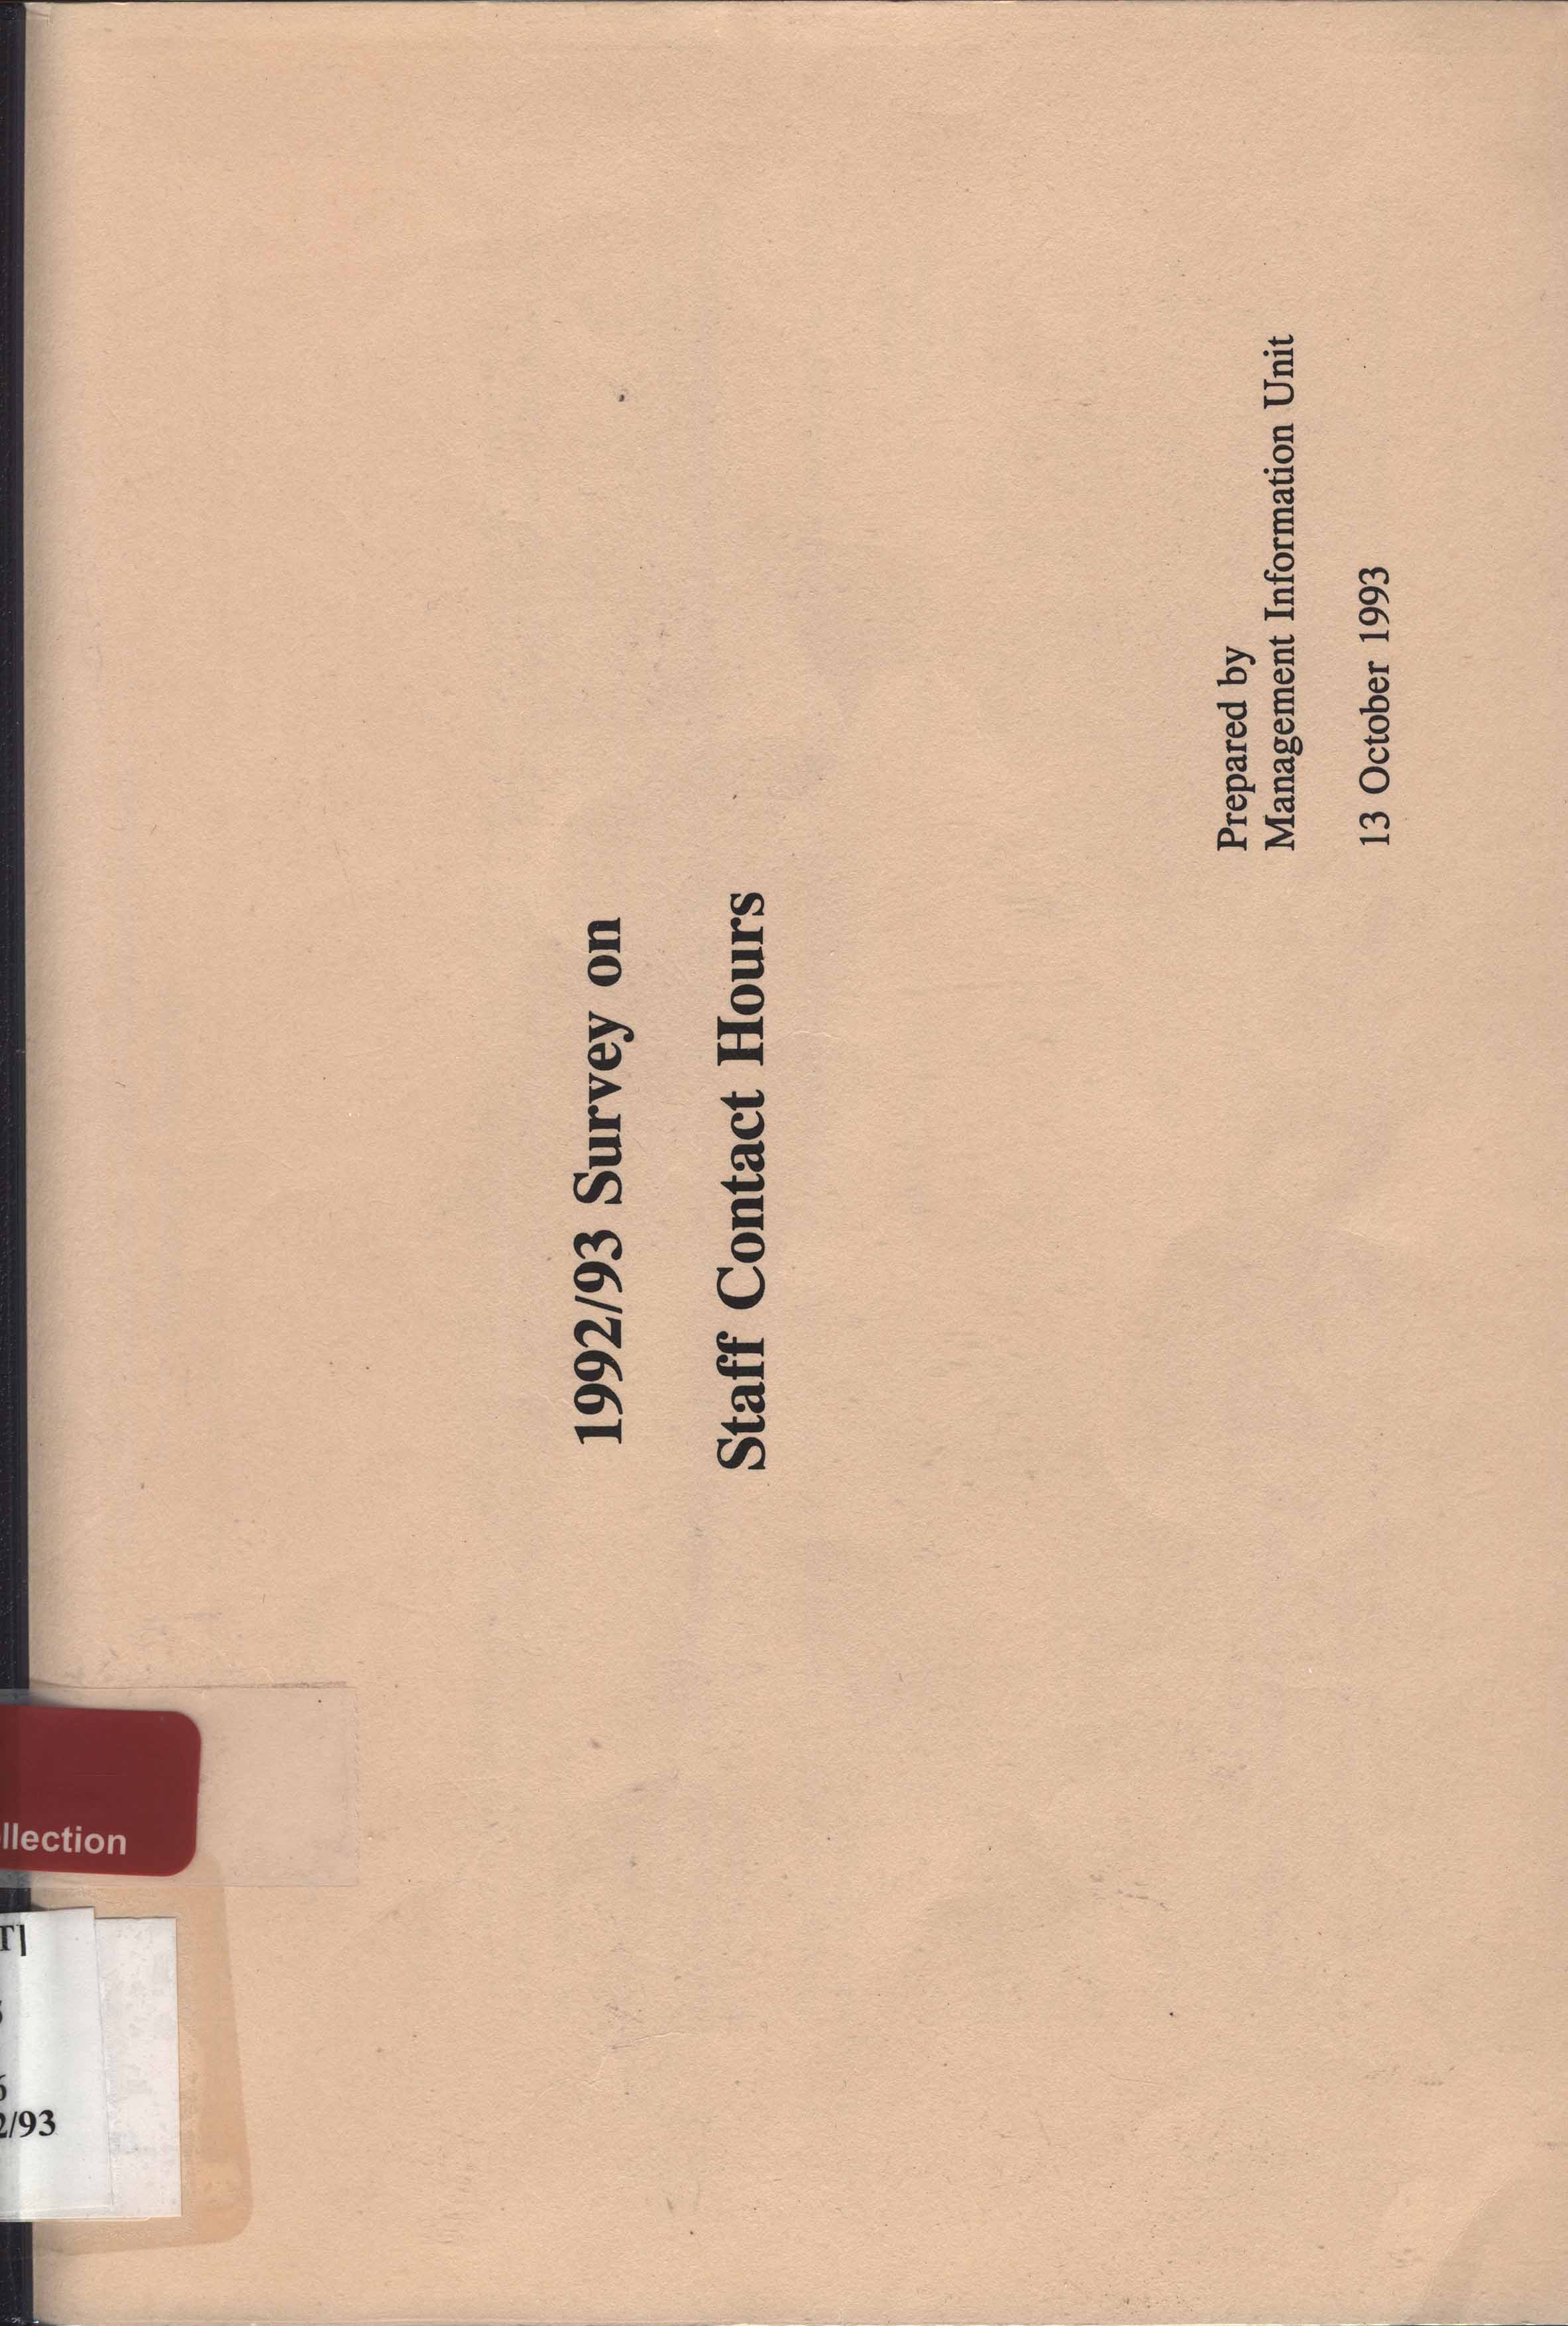 1992/93 Survey on staff contact hours 